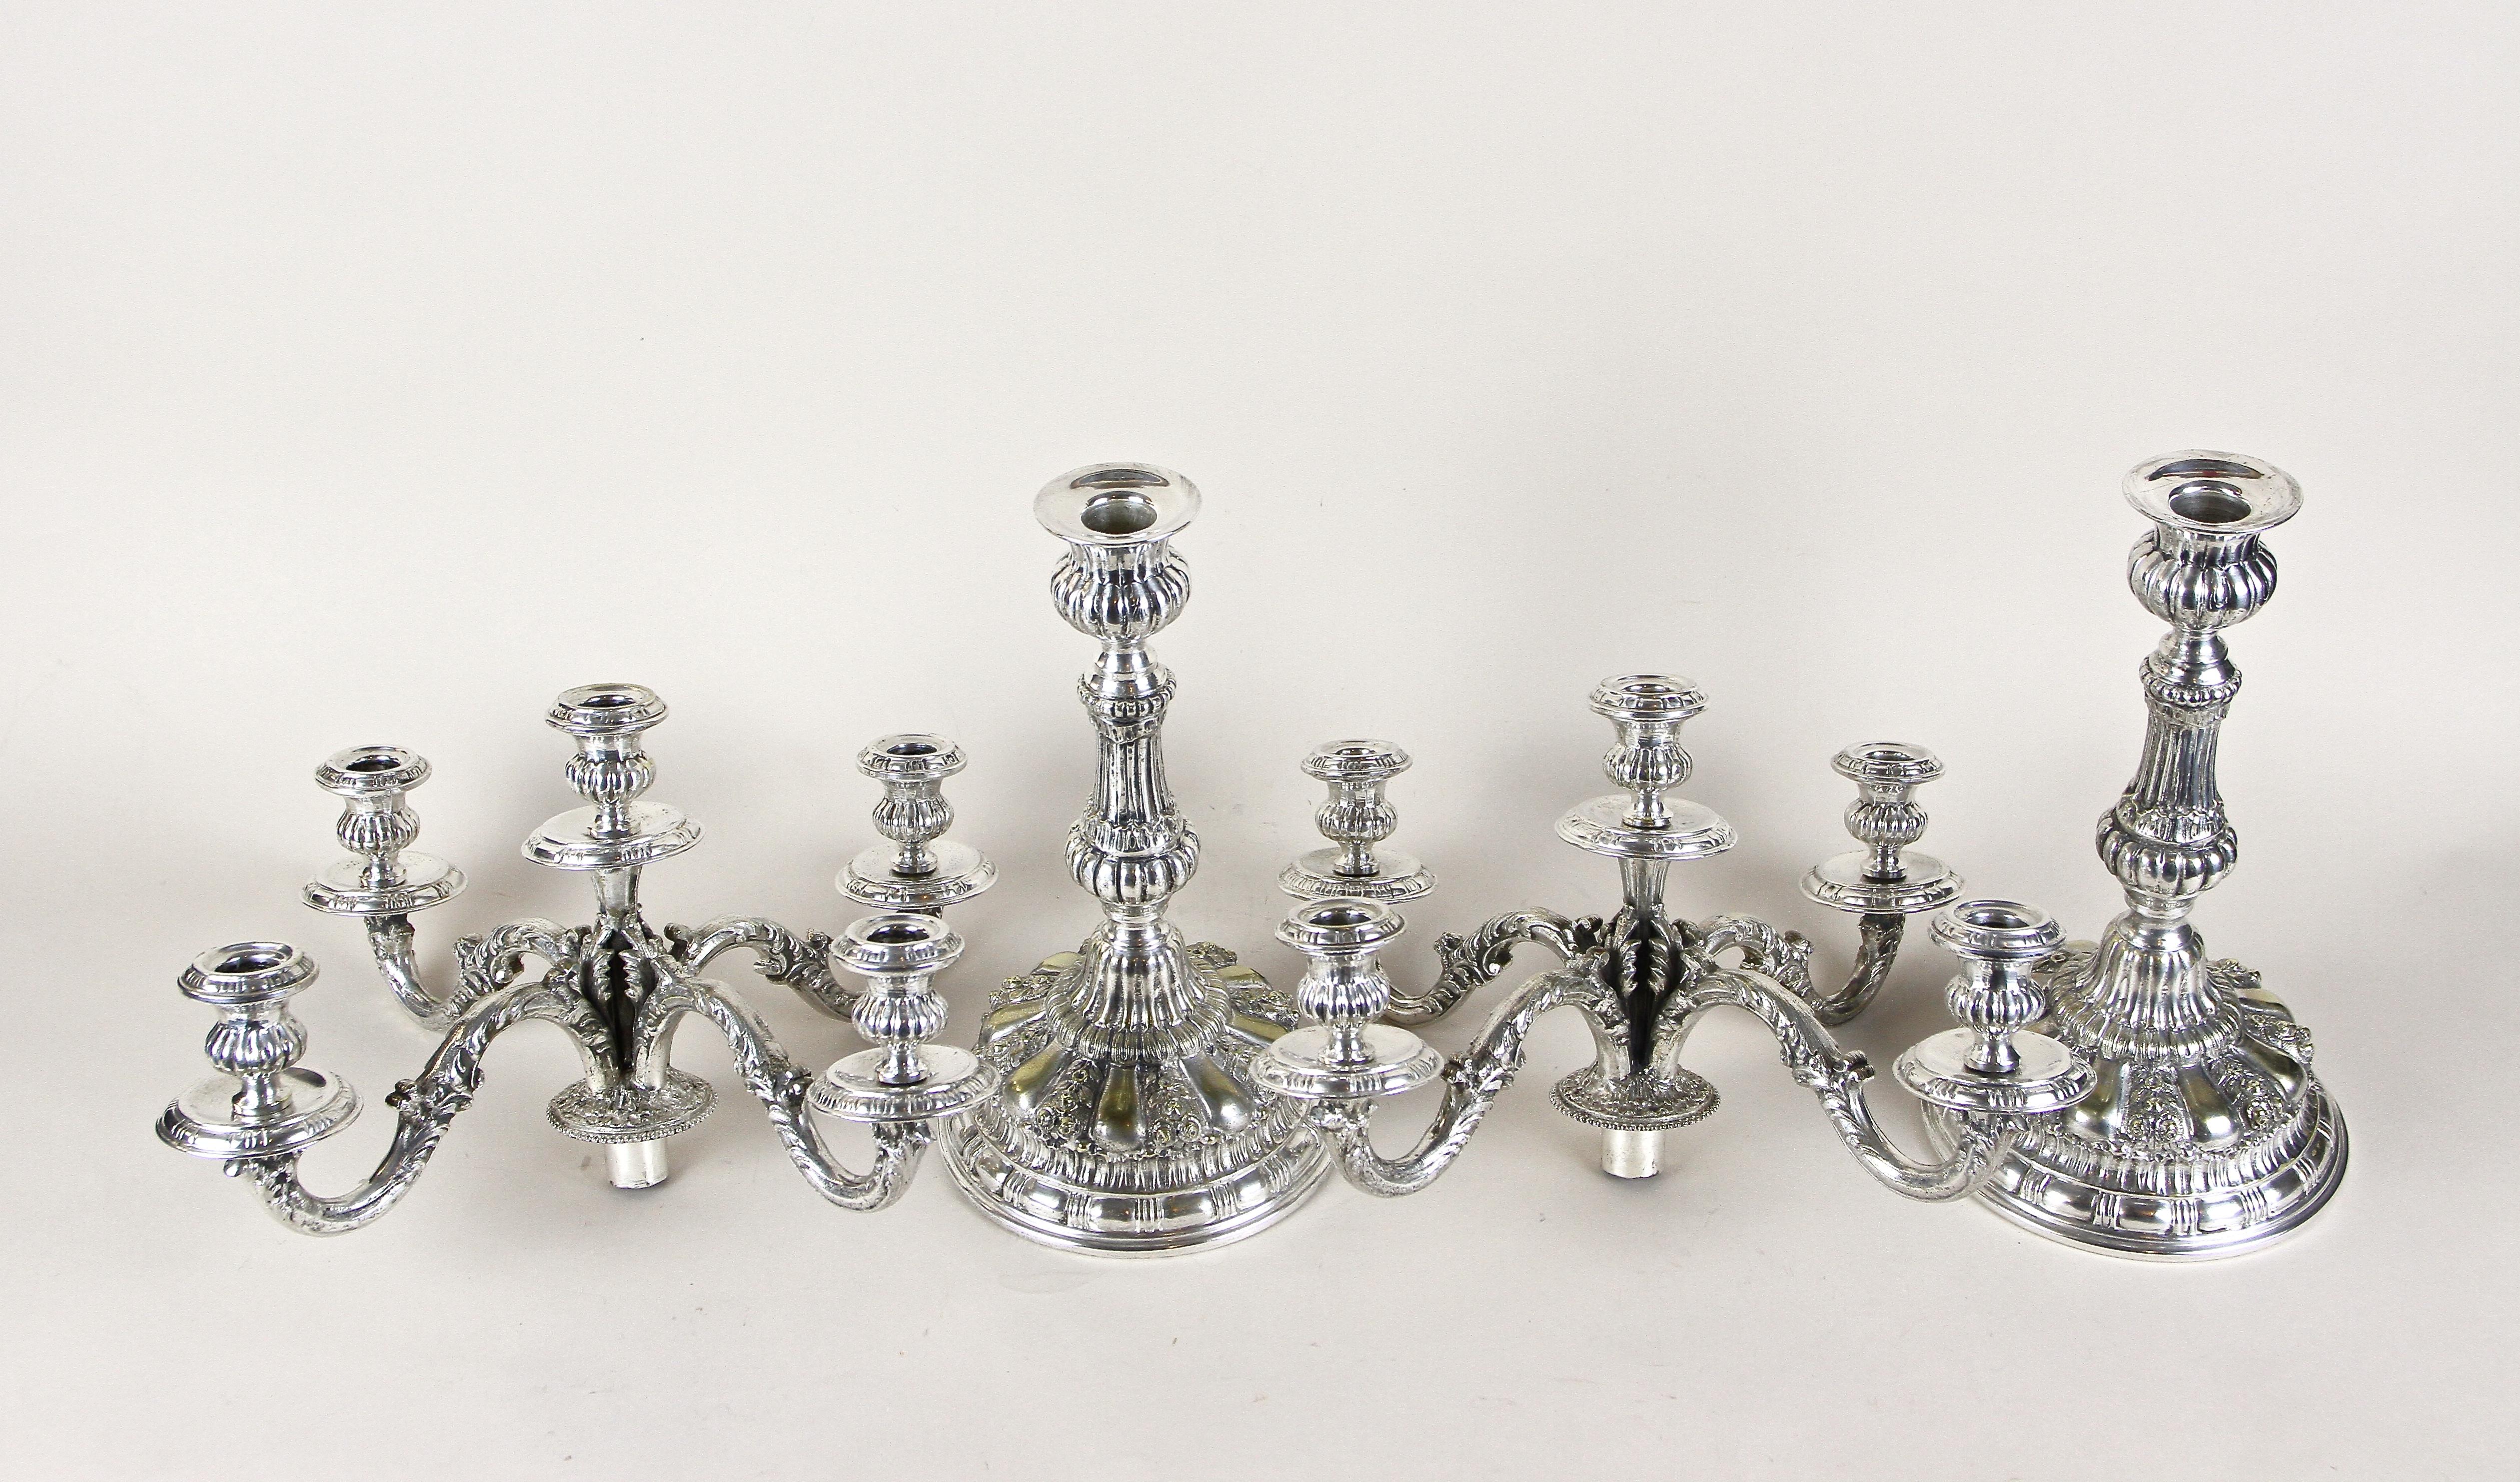 Brass Pair of 19th Century Silvered Candelabras 5-Armed, Austria, circa 1860 For Sale